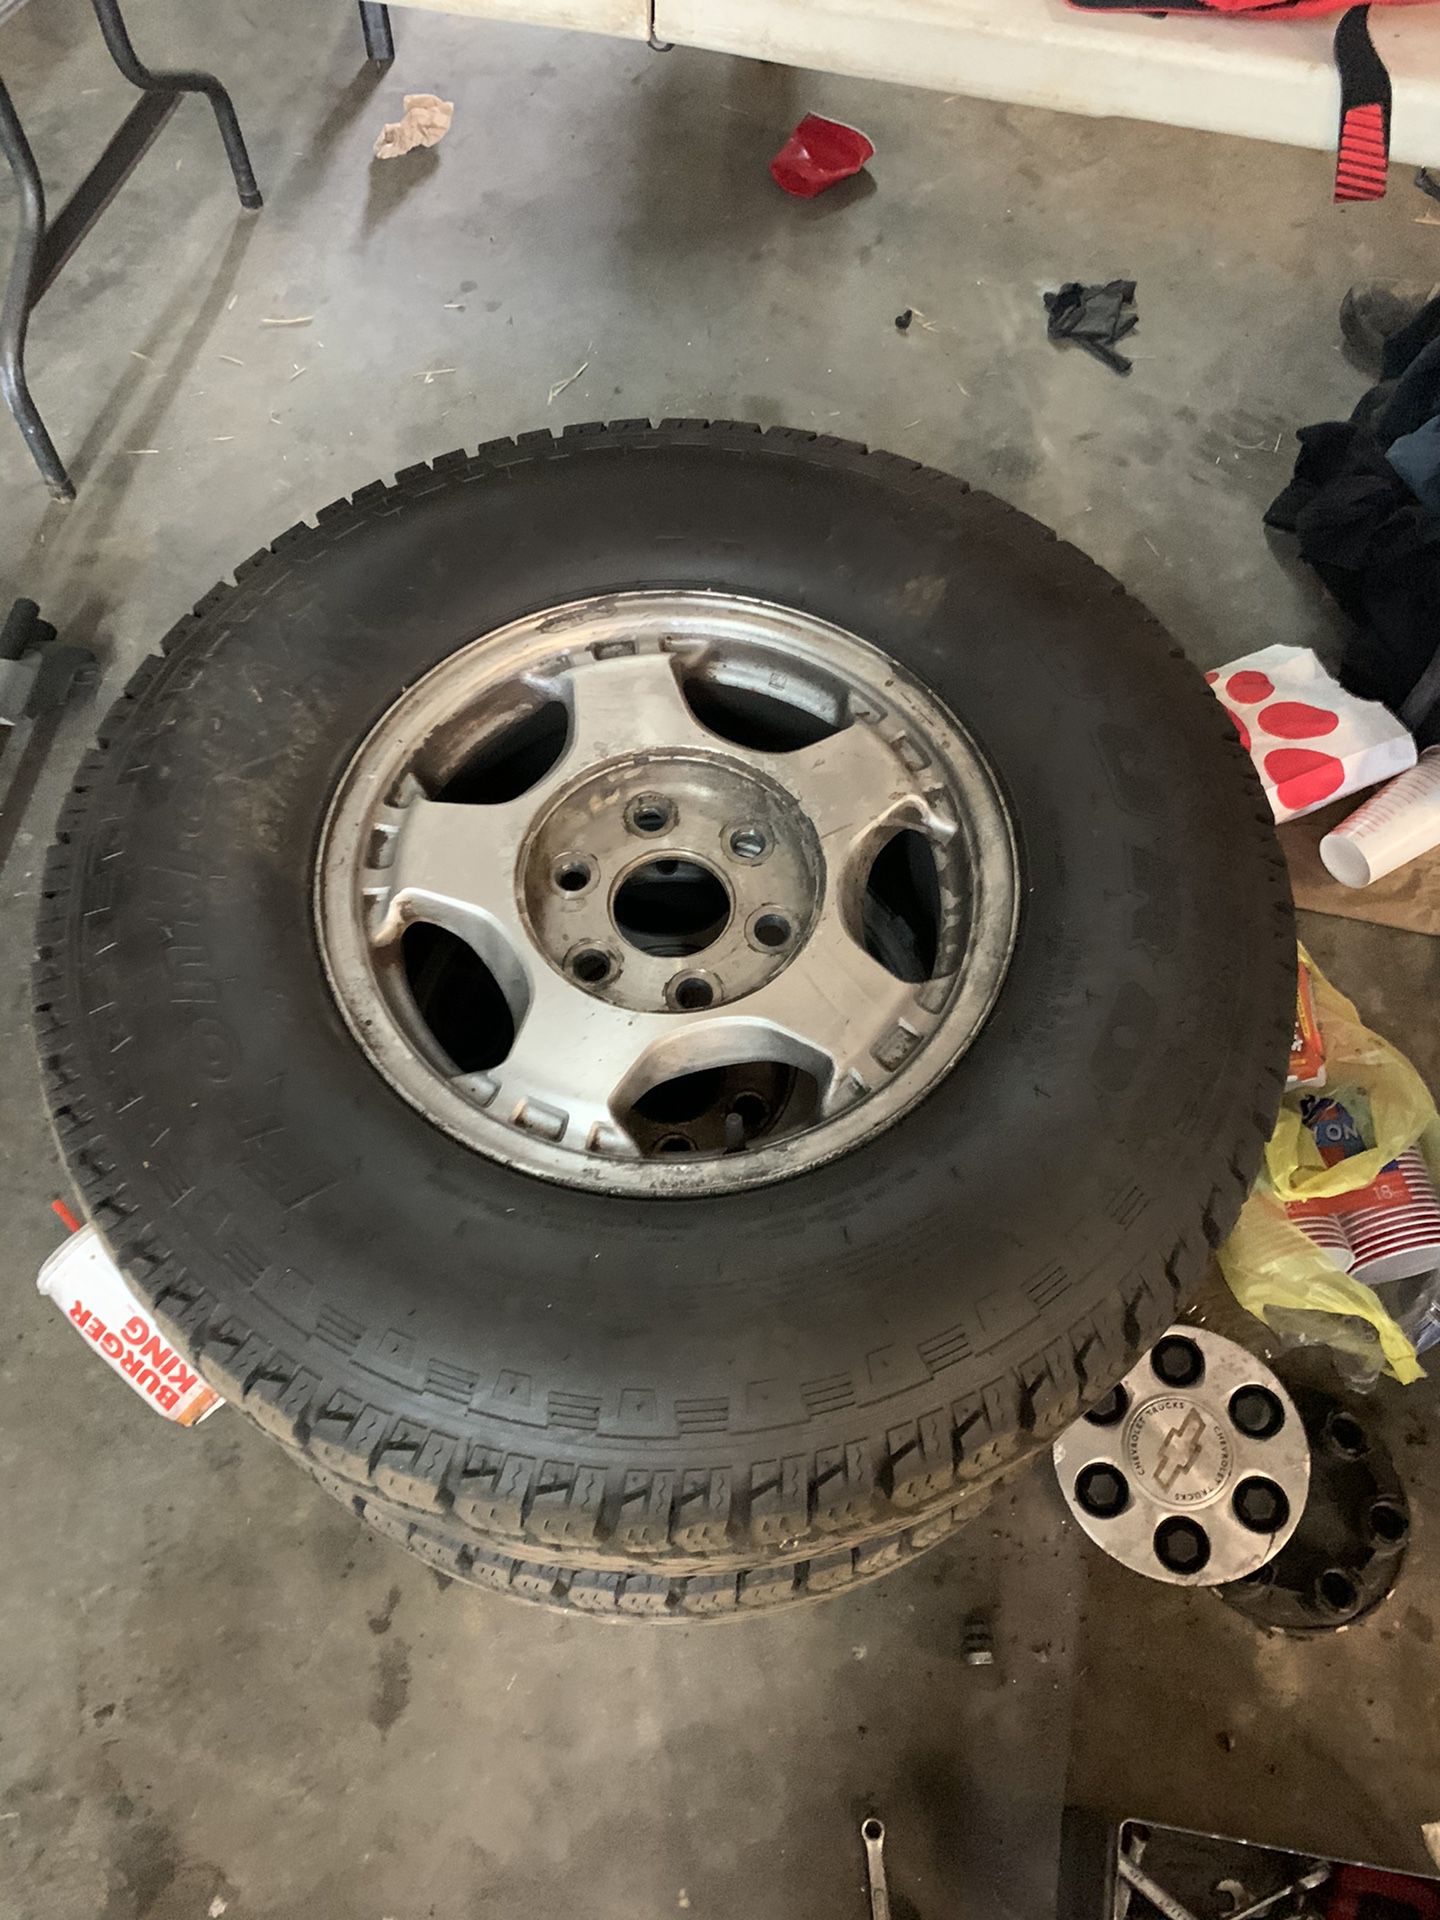 16in Chevy Stocks and brand new tires for Sale in Anderson, SC - OfferUp